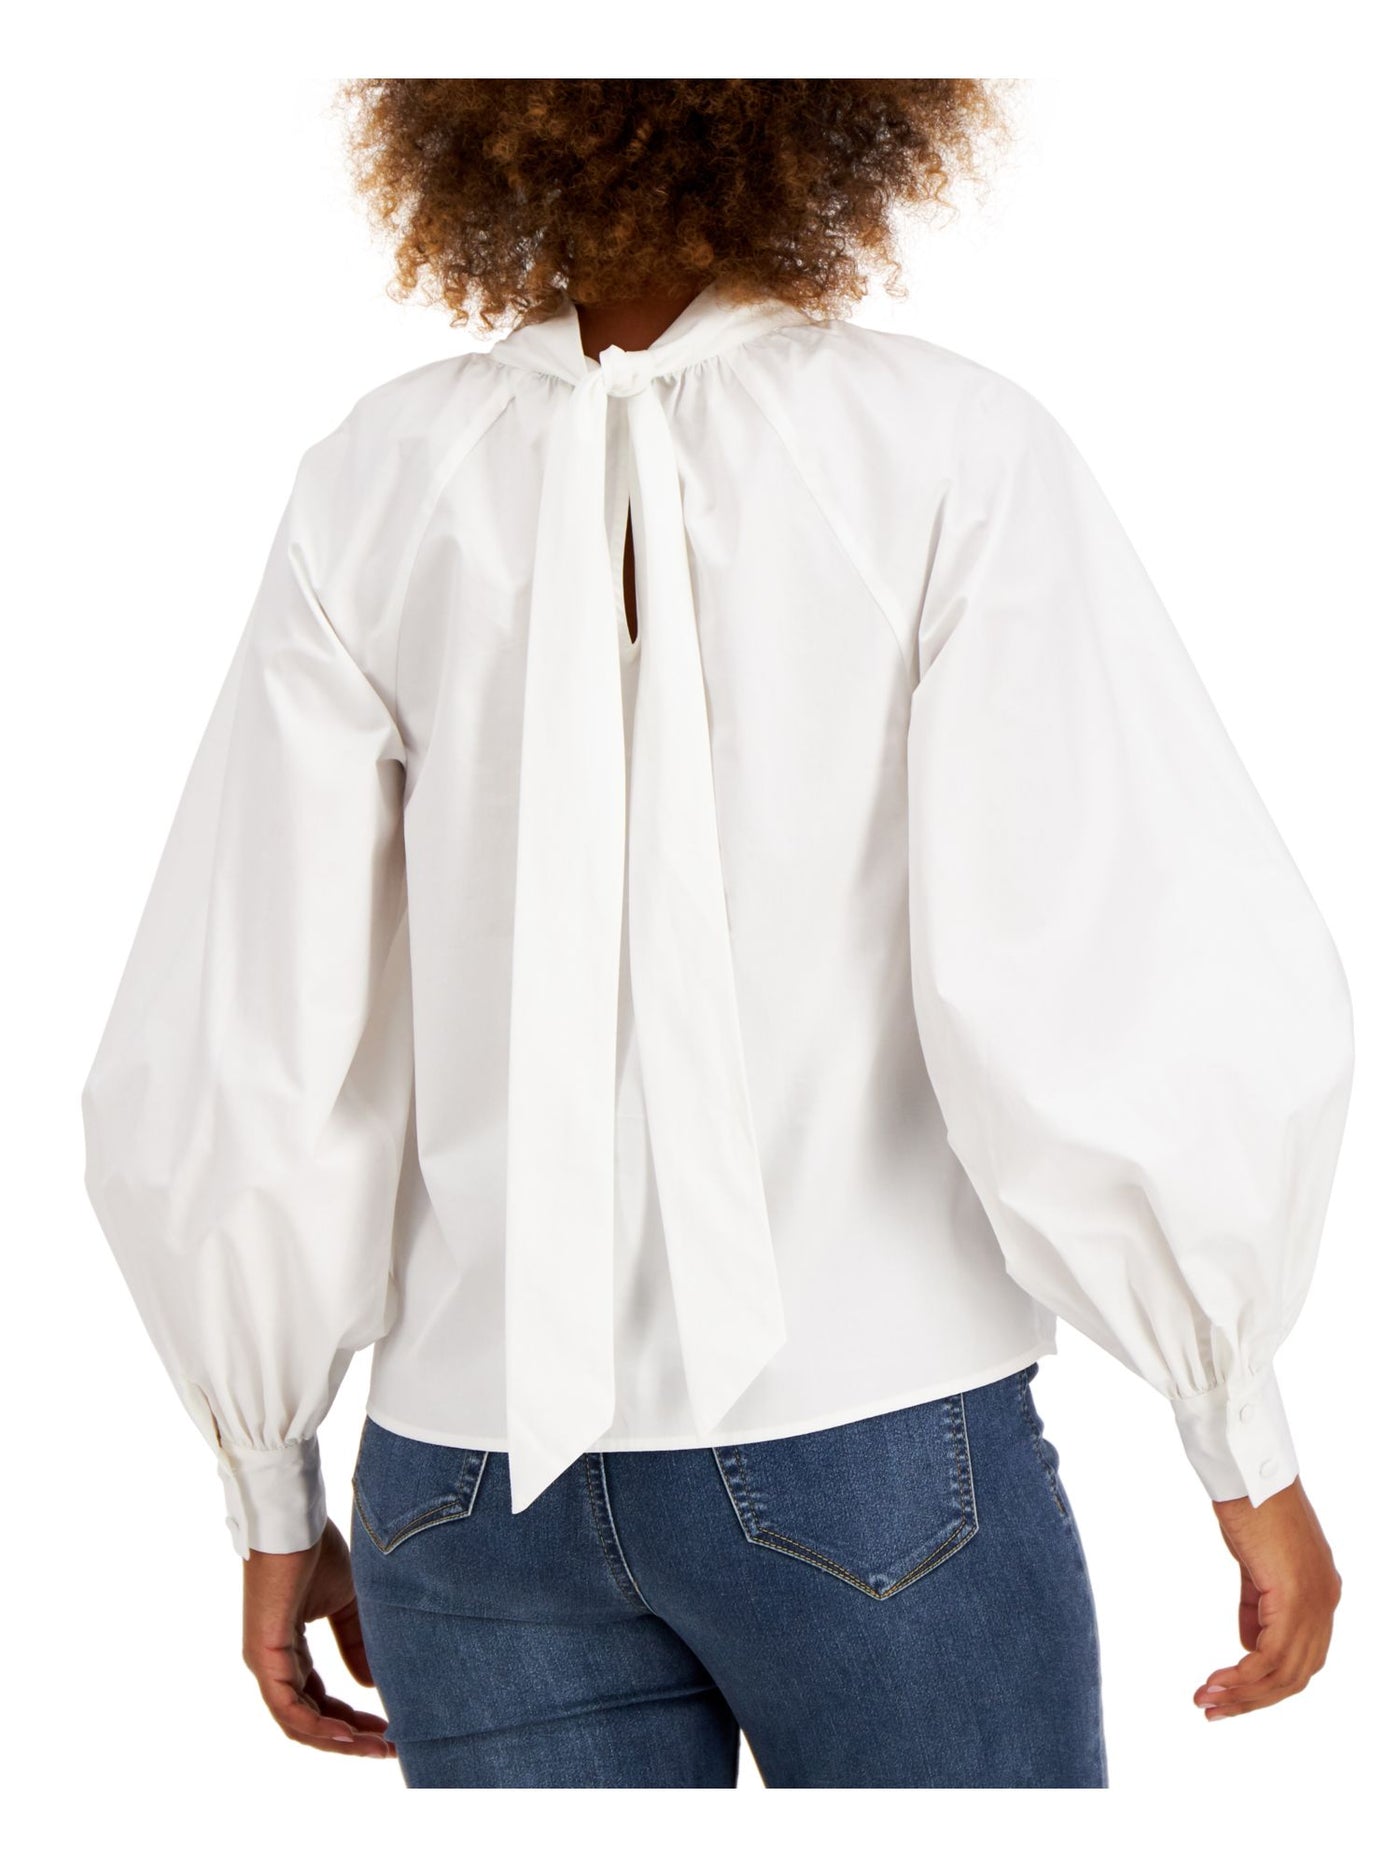 INC Womens White Long Sleeve Tie Neck Top XS